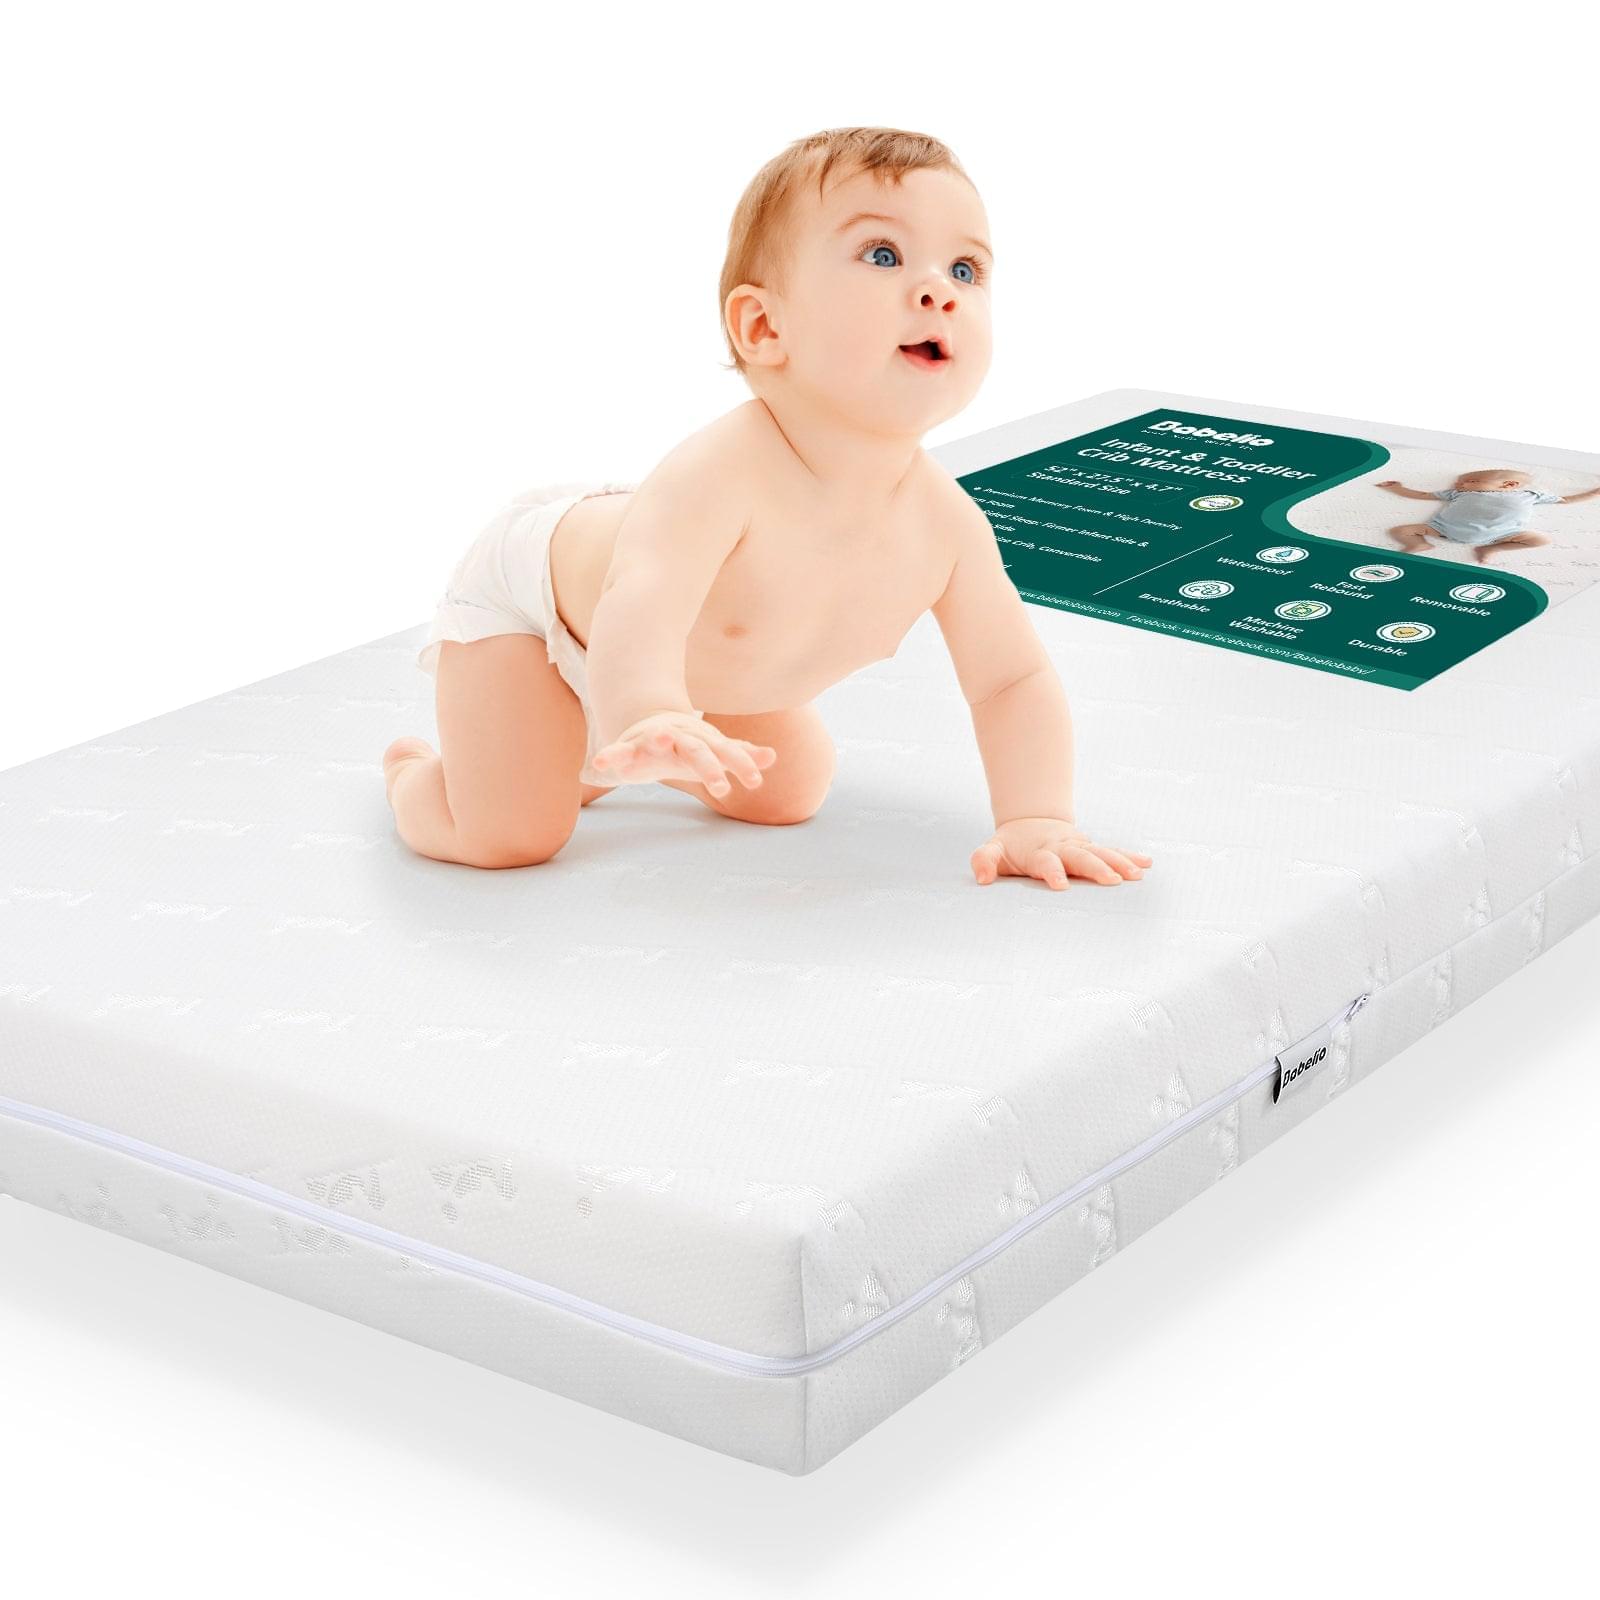 Babelio Premium Memory Foam Crib Mattresses, 2-Stage, Cool Gel, with Waterproof Lining & Removable Mattress Cover, for Standard Crib & Toddler Bed (